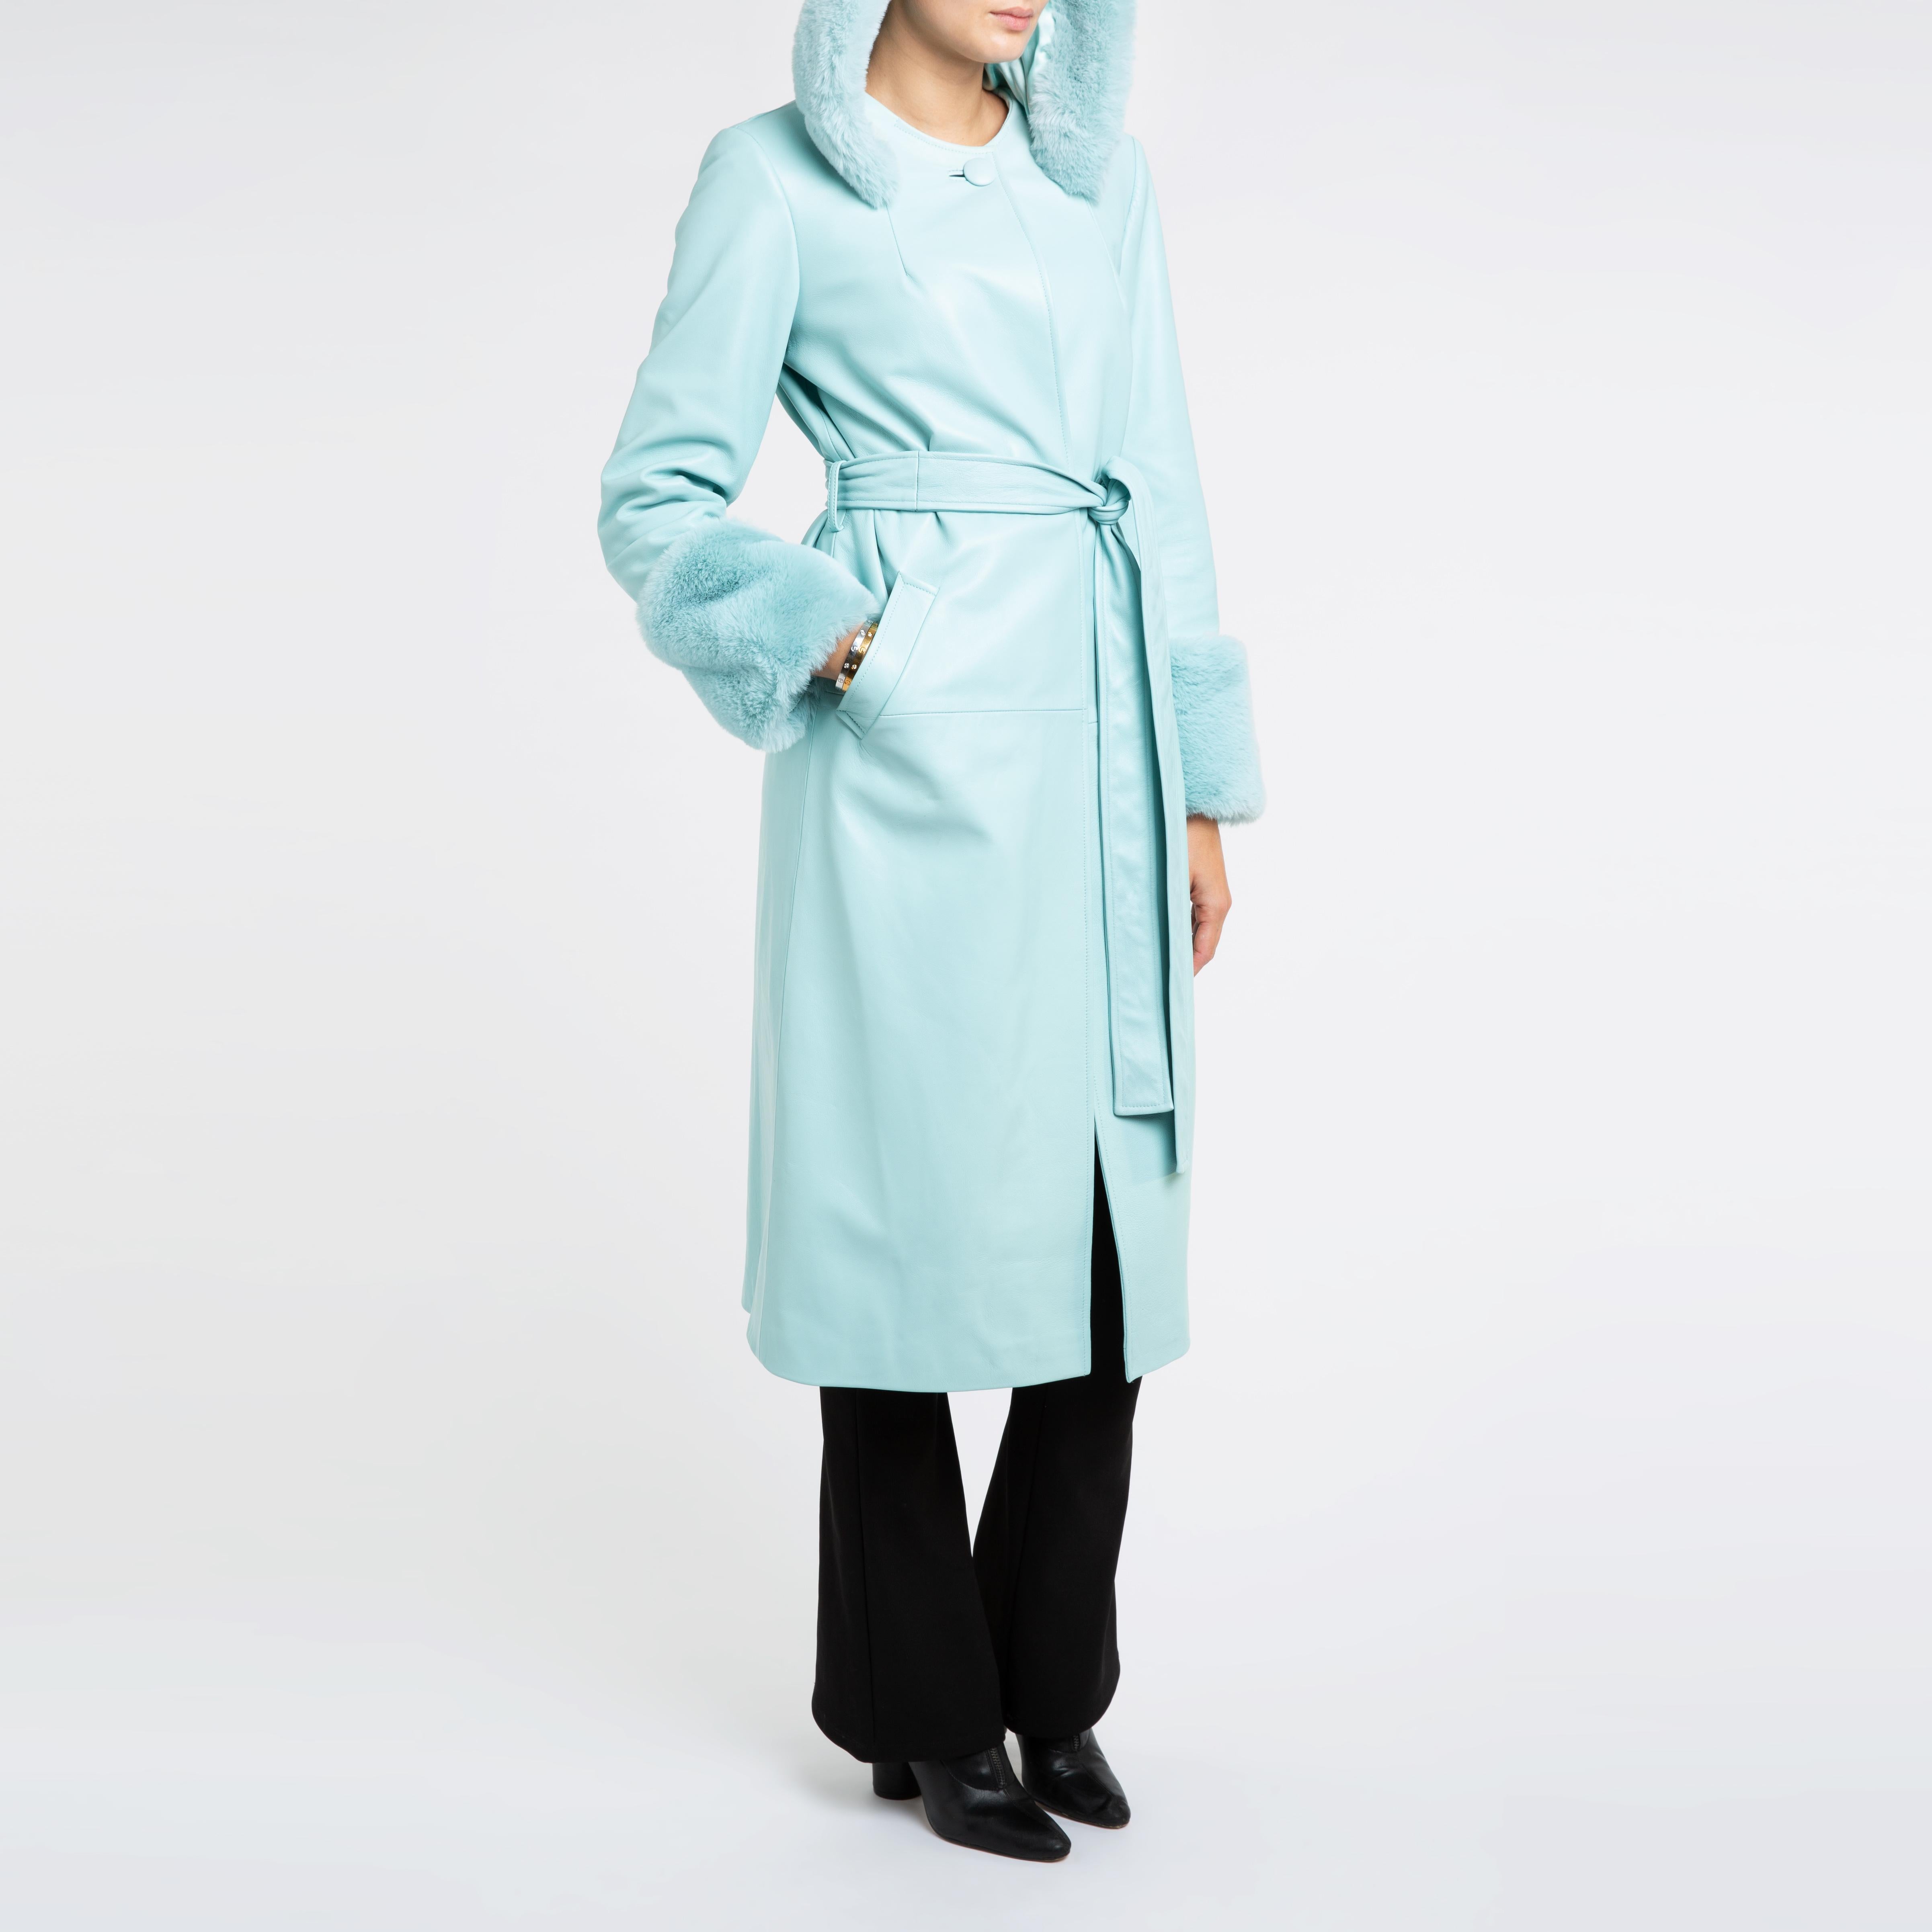 Verheyen London Hooded Leather Coat in Blue Aquamarine & Faux Fur - Size uk 6

Handmade in London, made with 100% Italian Lambs Leather and the highest quality of faux fur to match, this luxury item is an investment piece to wear for a lifetime. 